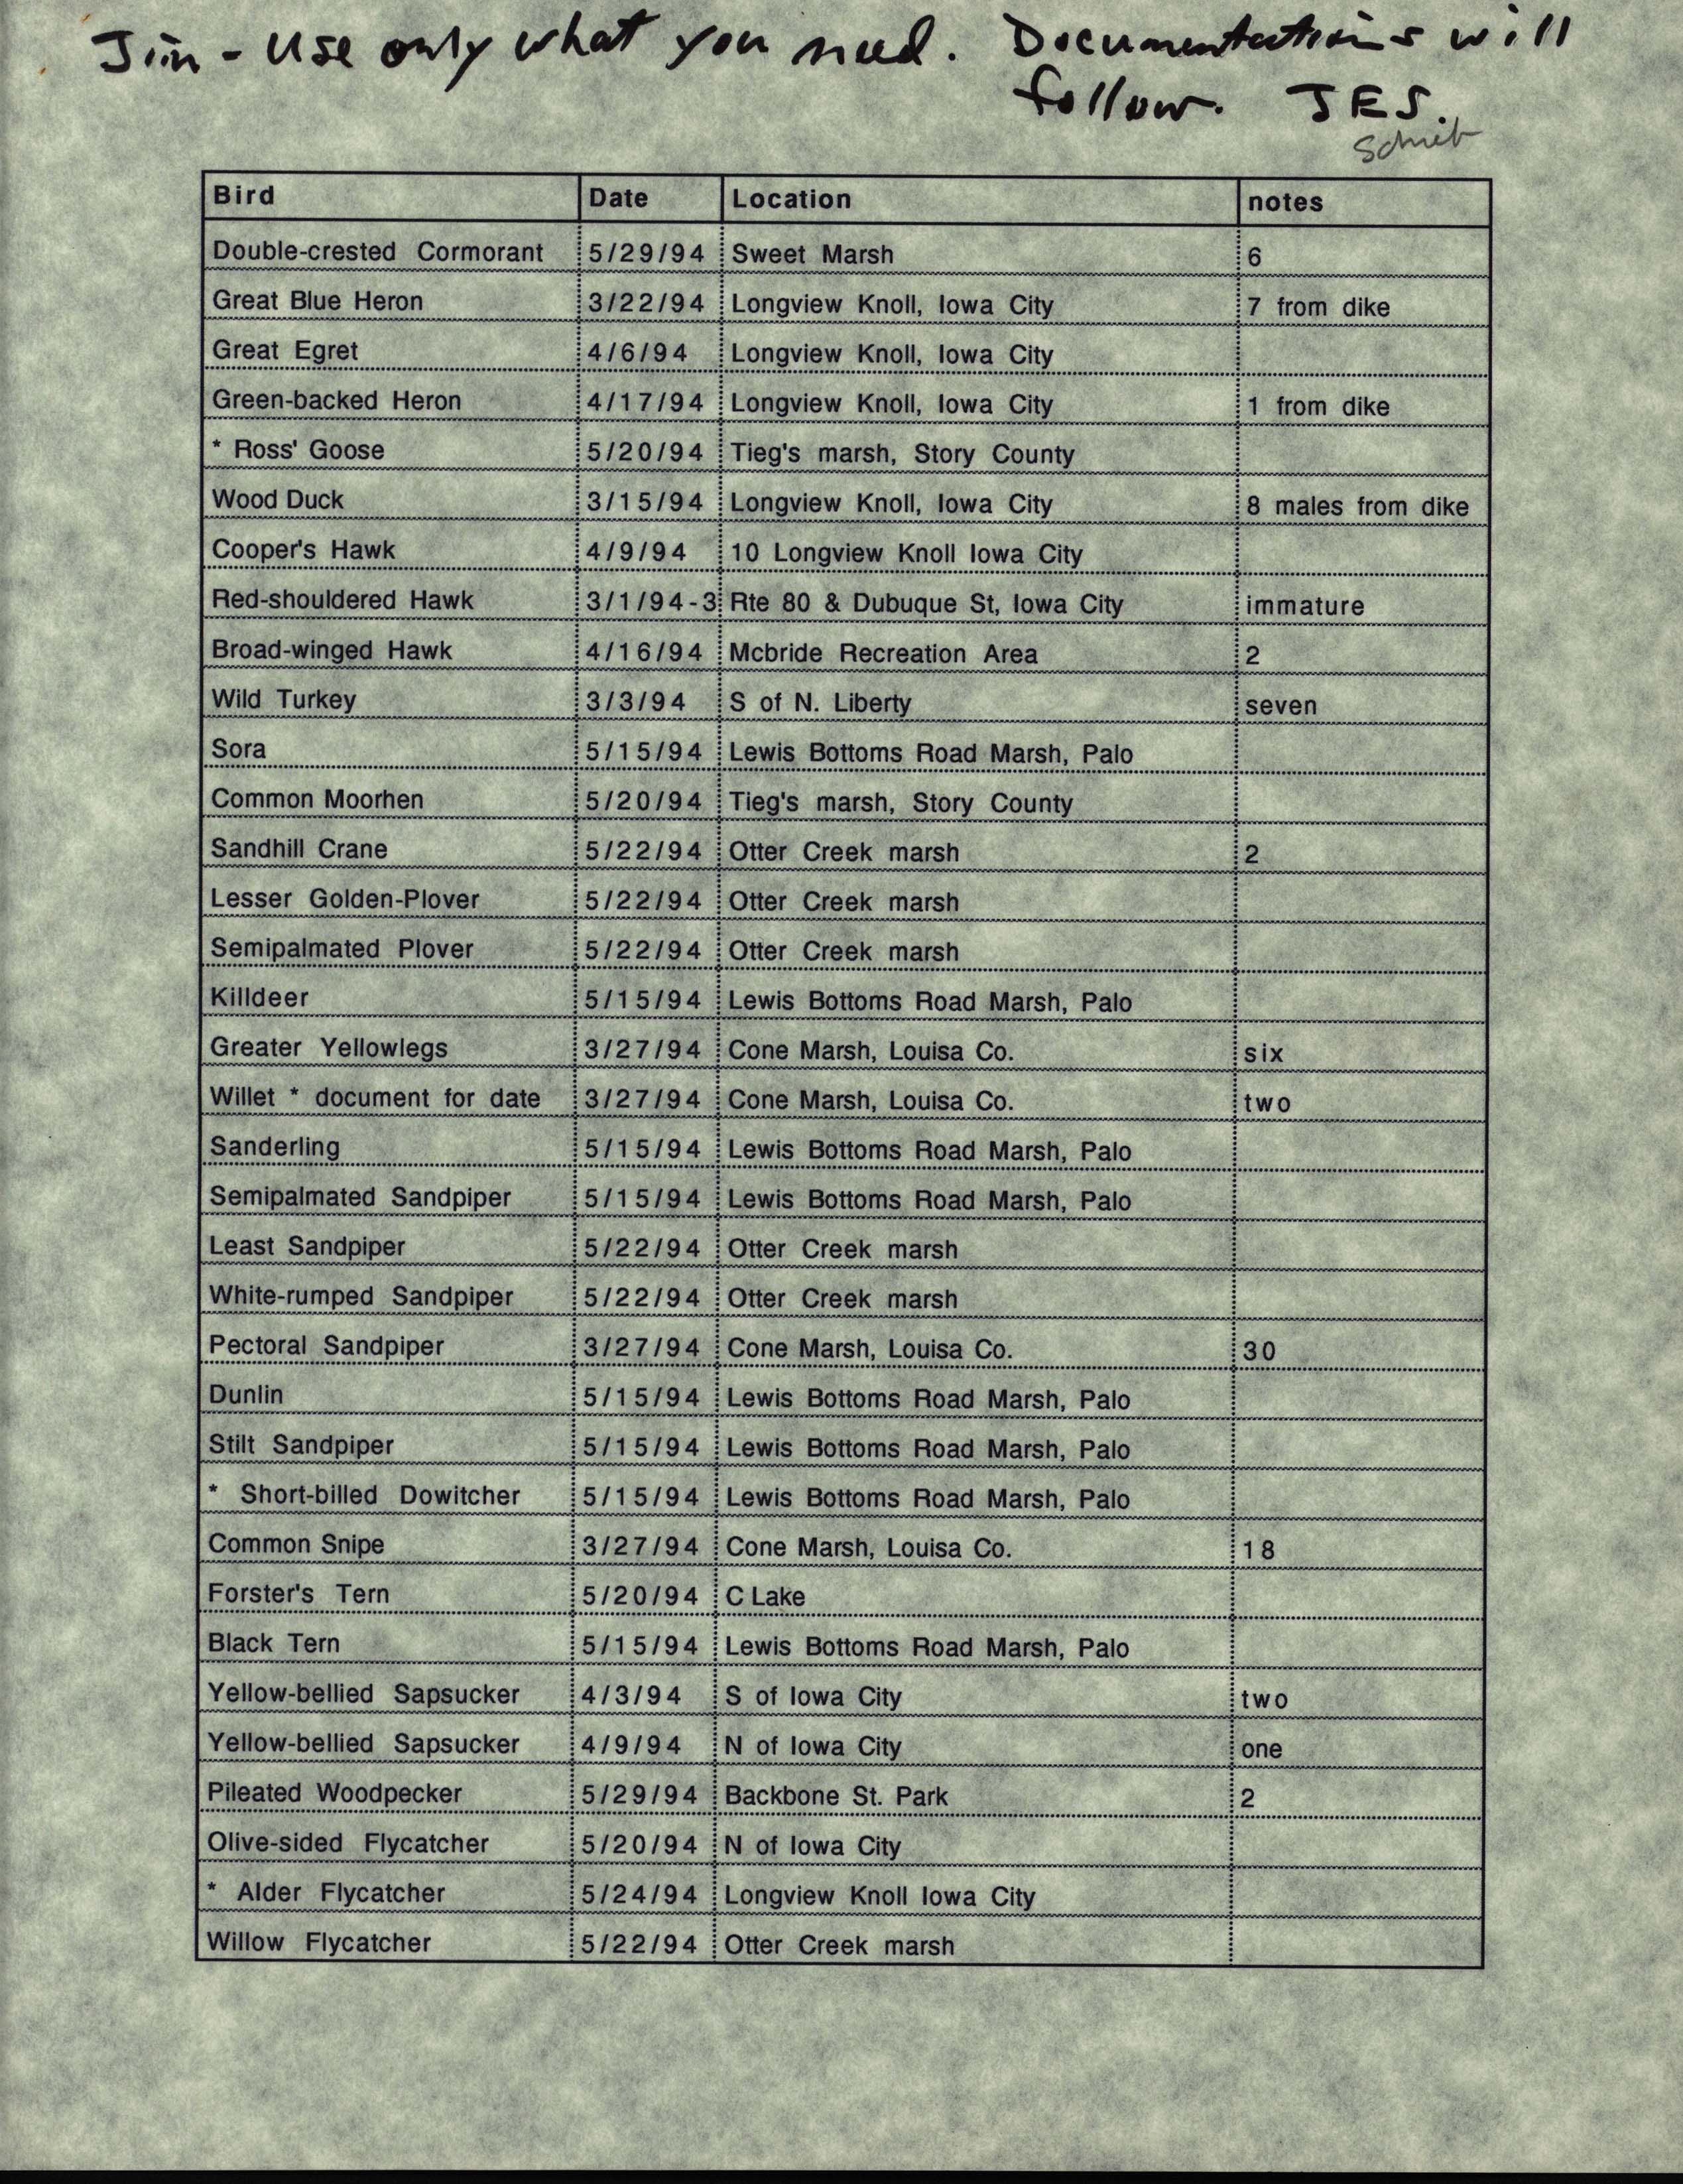 Annotated bird sighting list for Spring 1994 compiled by James Scheib